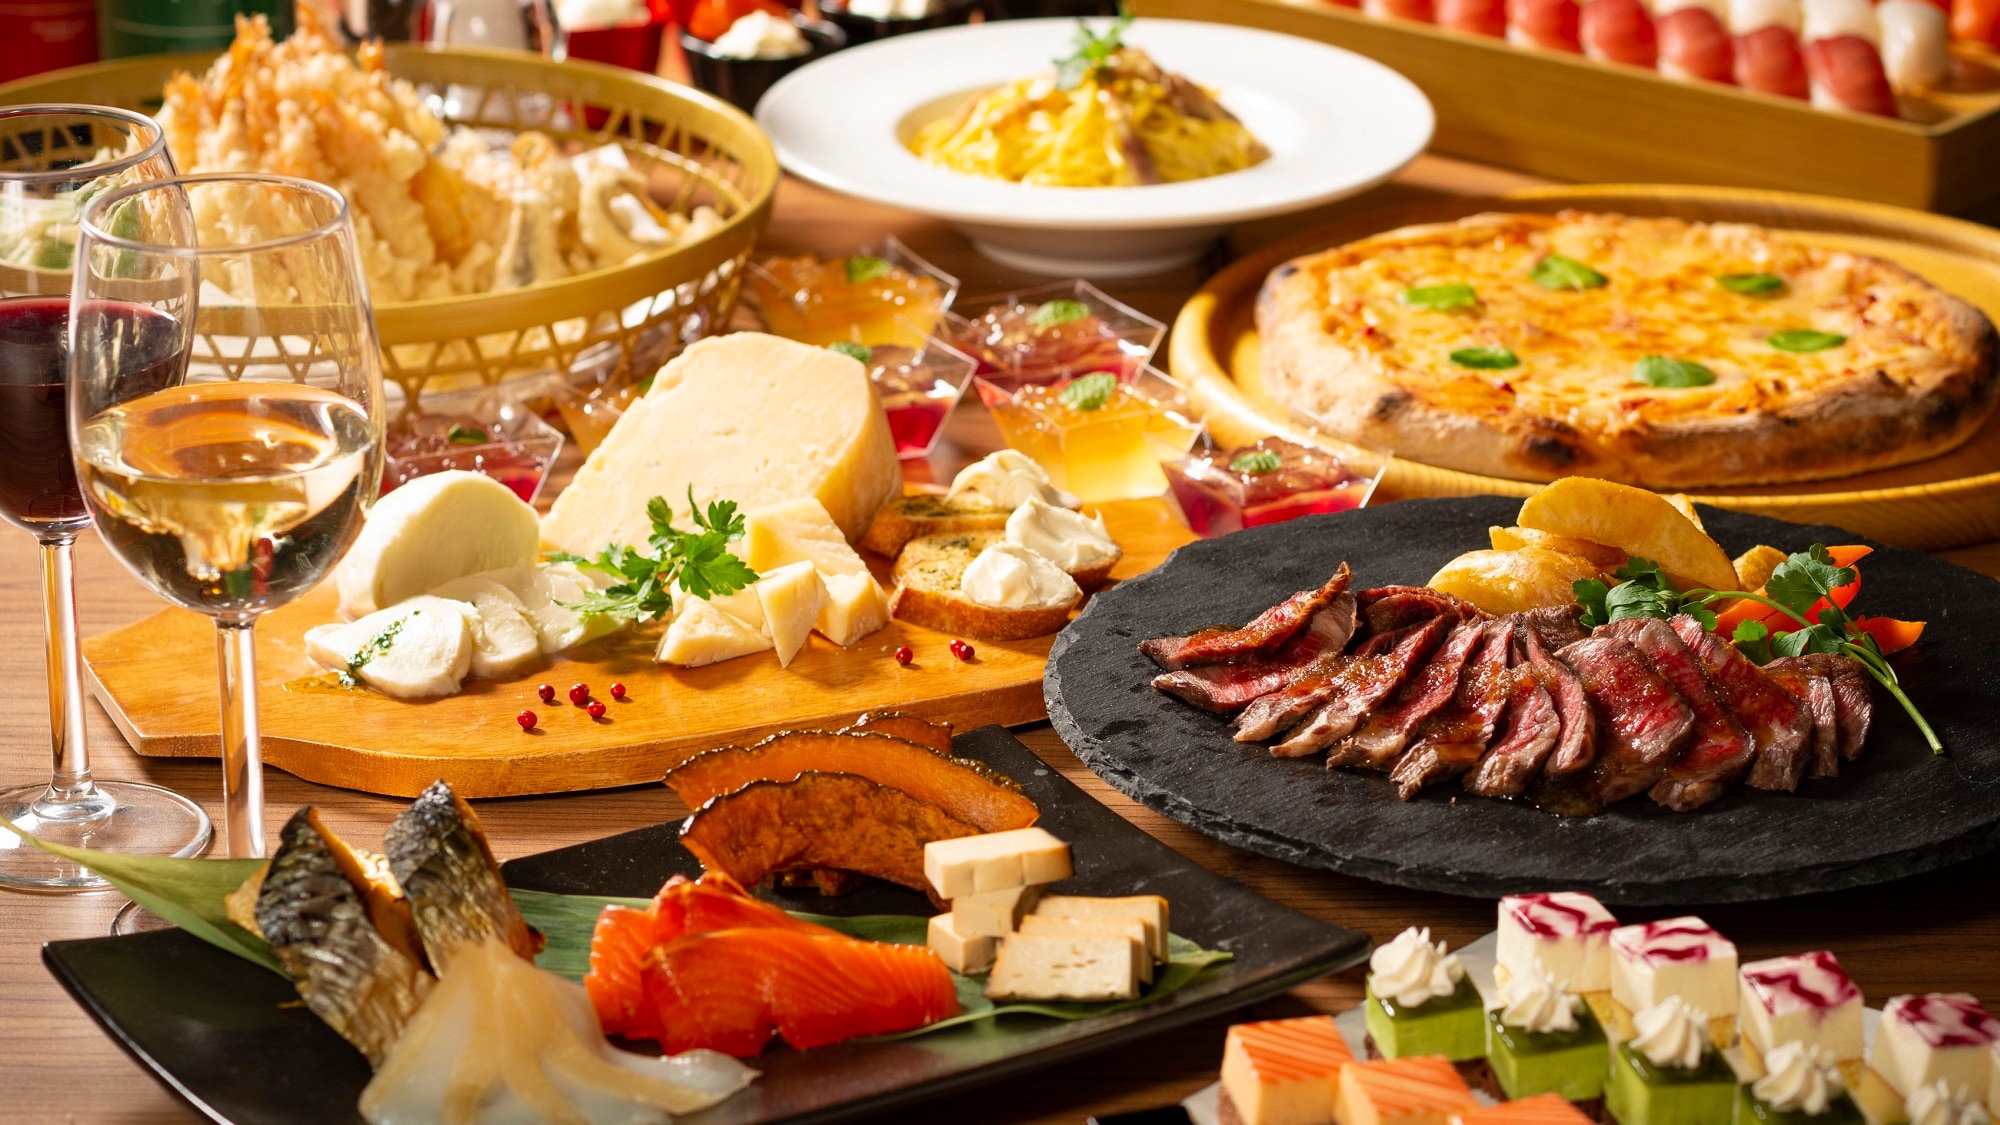 [Dinner] Approximately 90 types of dinner buffet (pictured is an image)